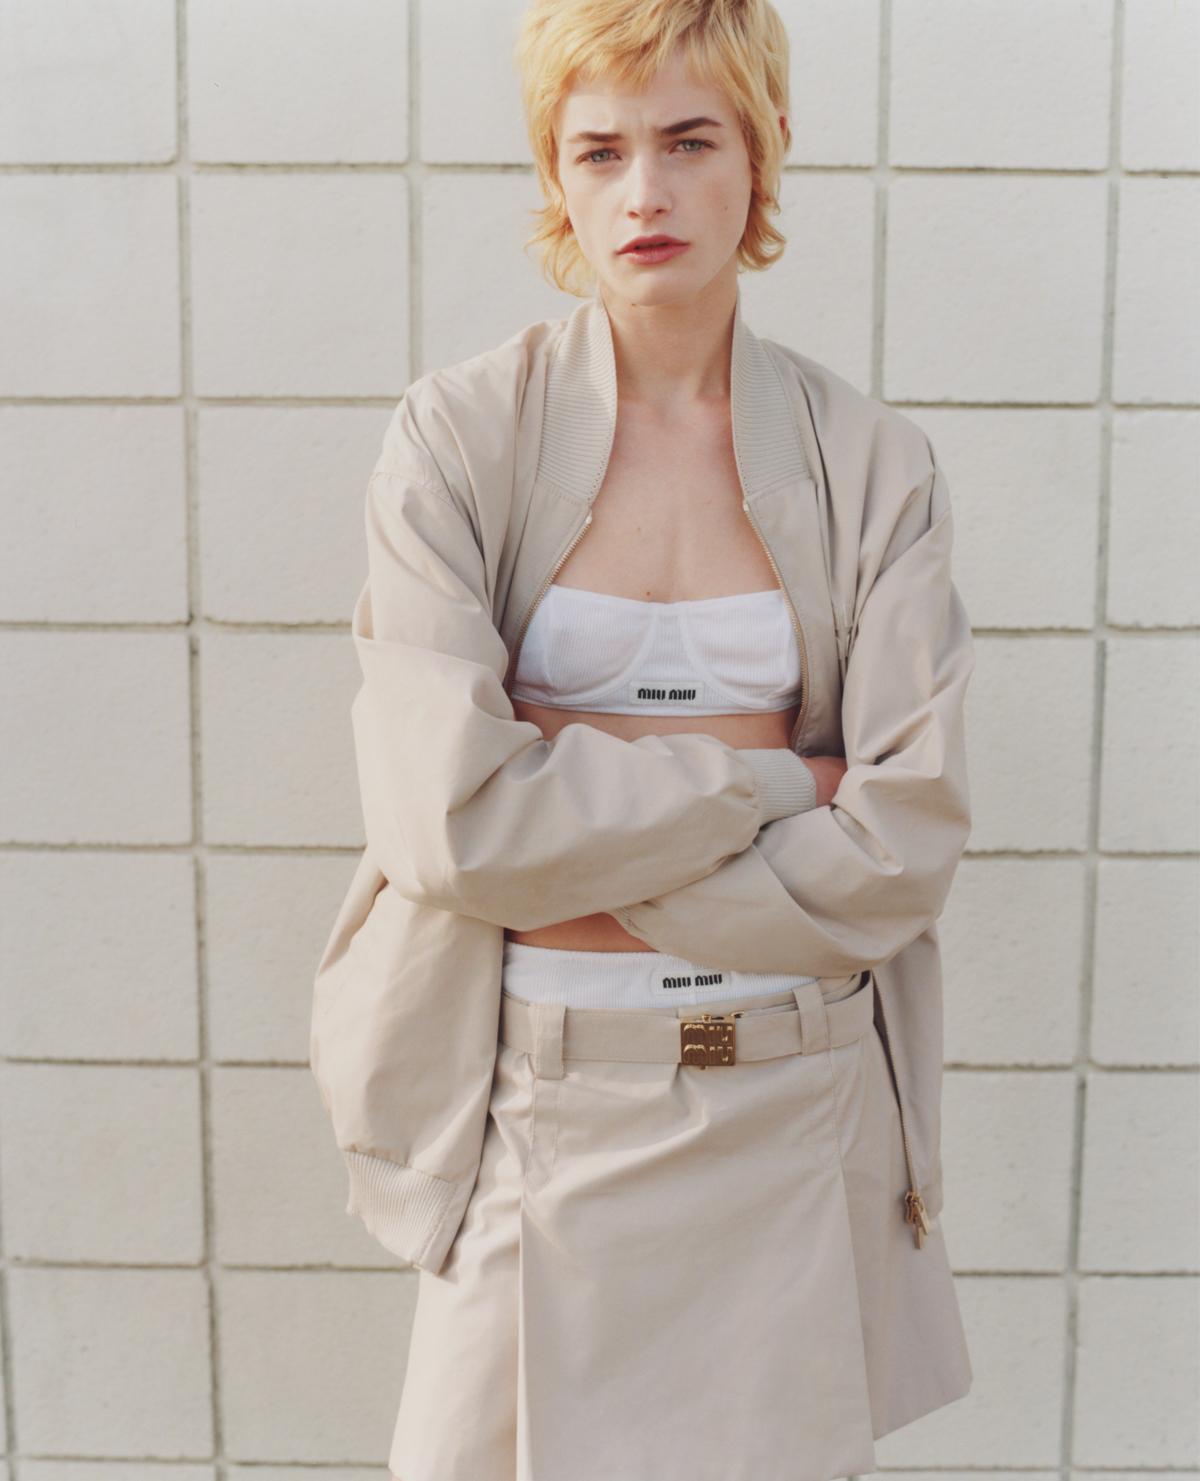 Esther Rose McGregor in Miu Miu by Diego Vourakis & Britt Layton for Present Space Summer 2023